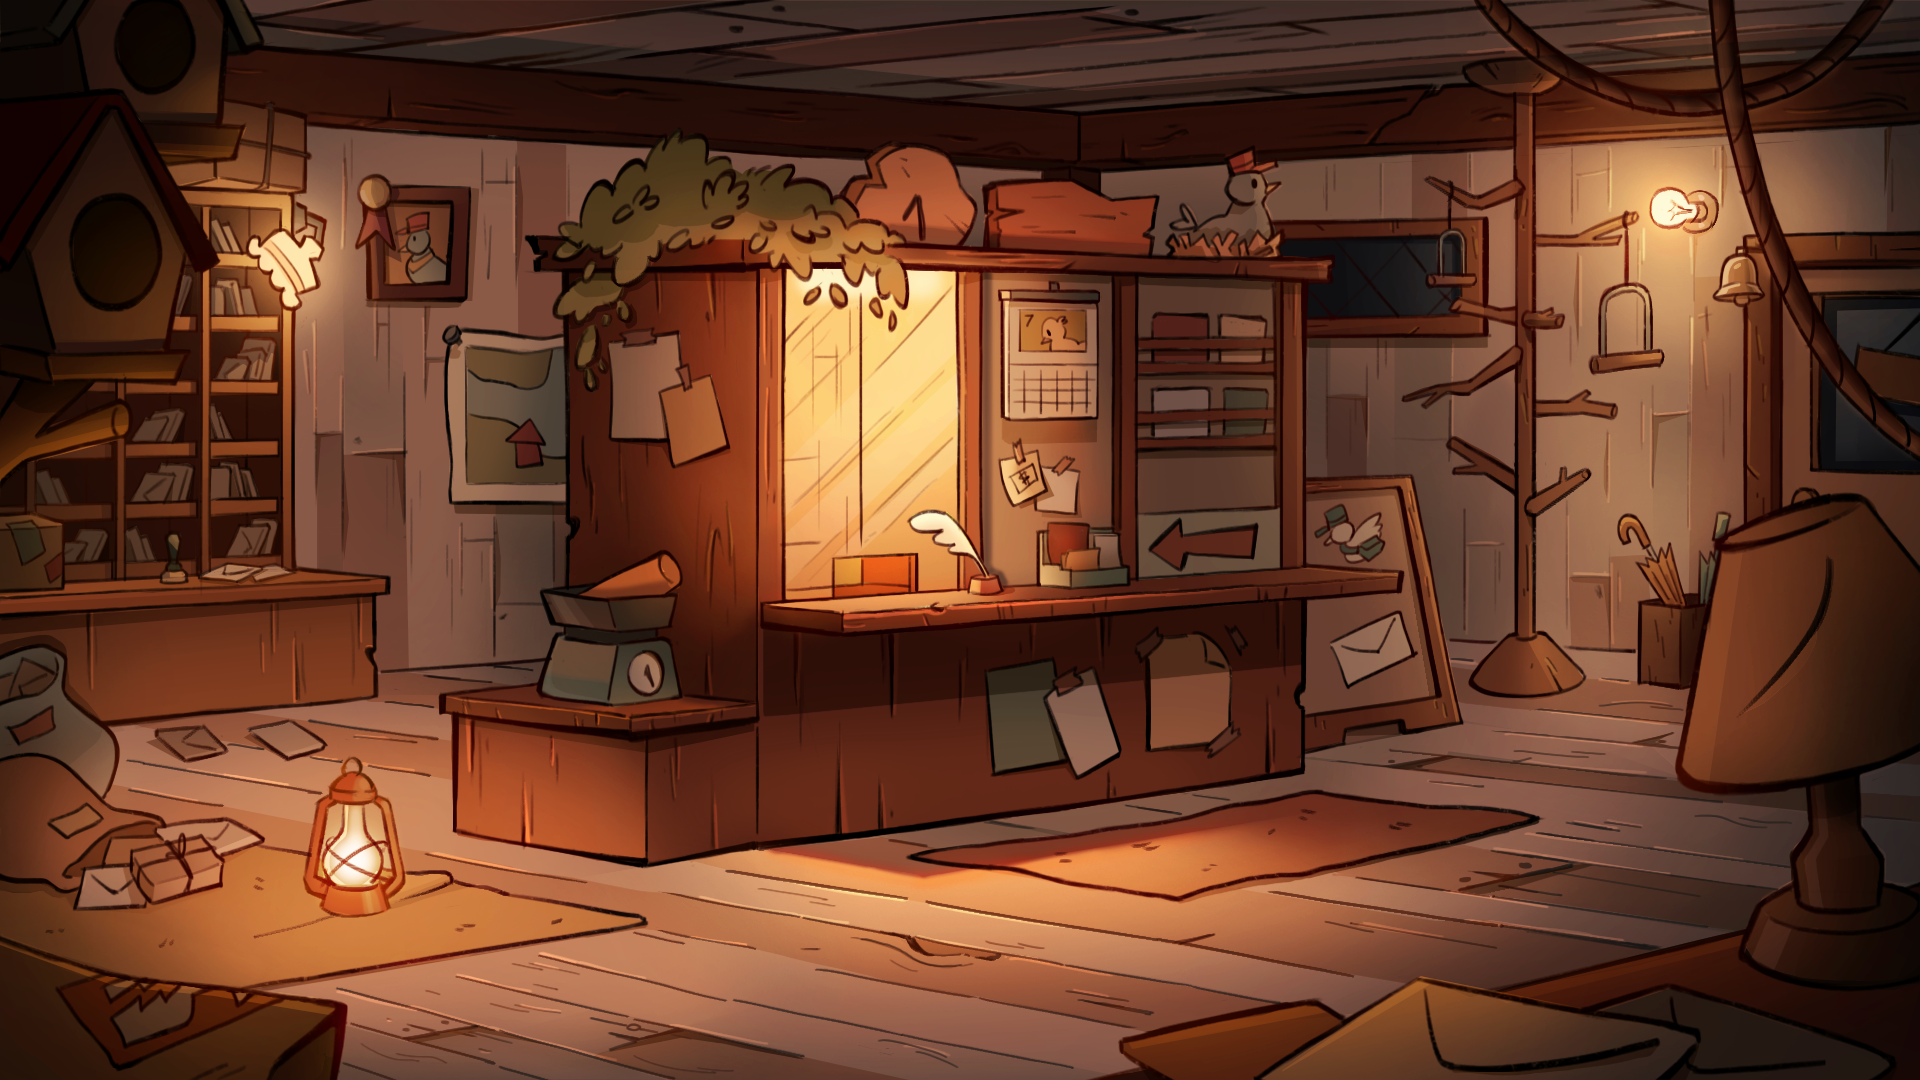 Gravity Falls post office view 1 (Final colour).png